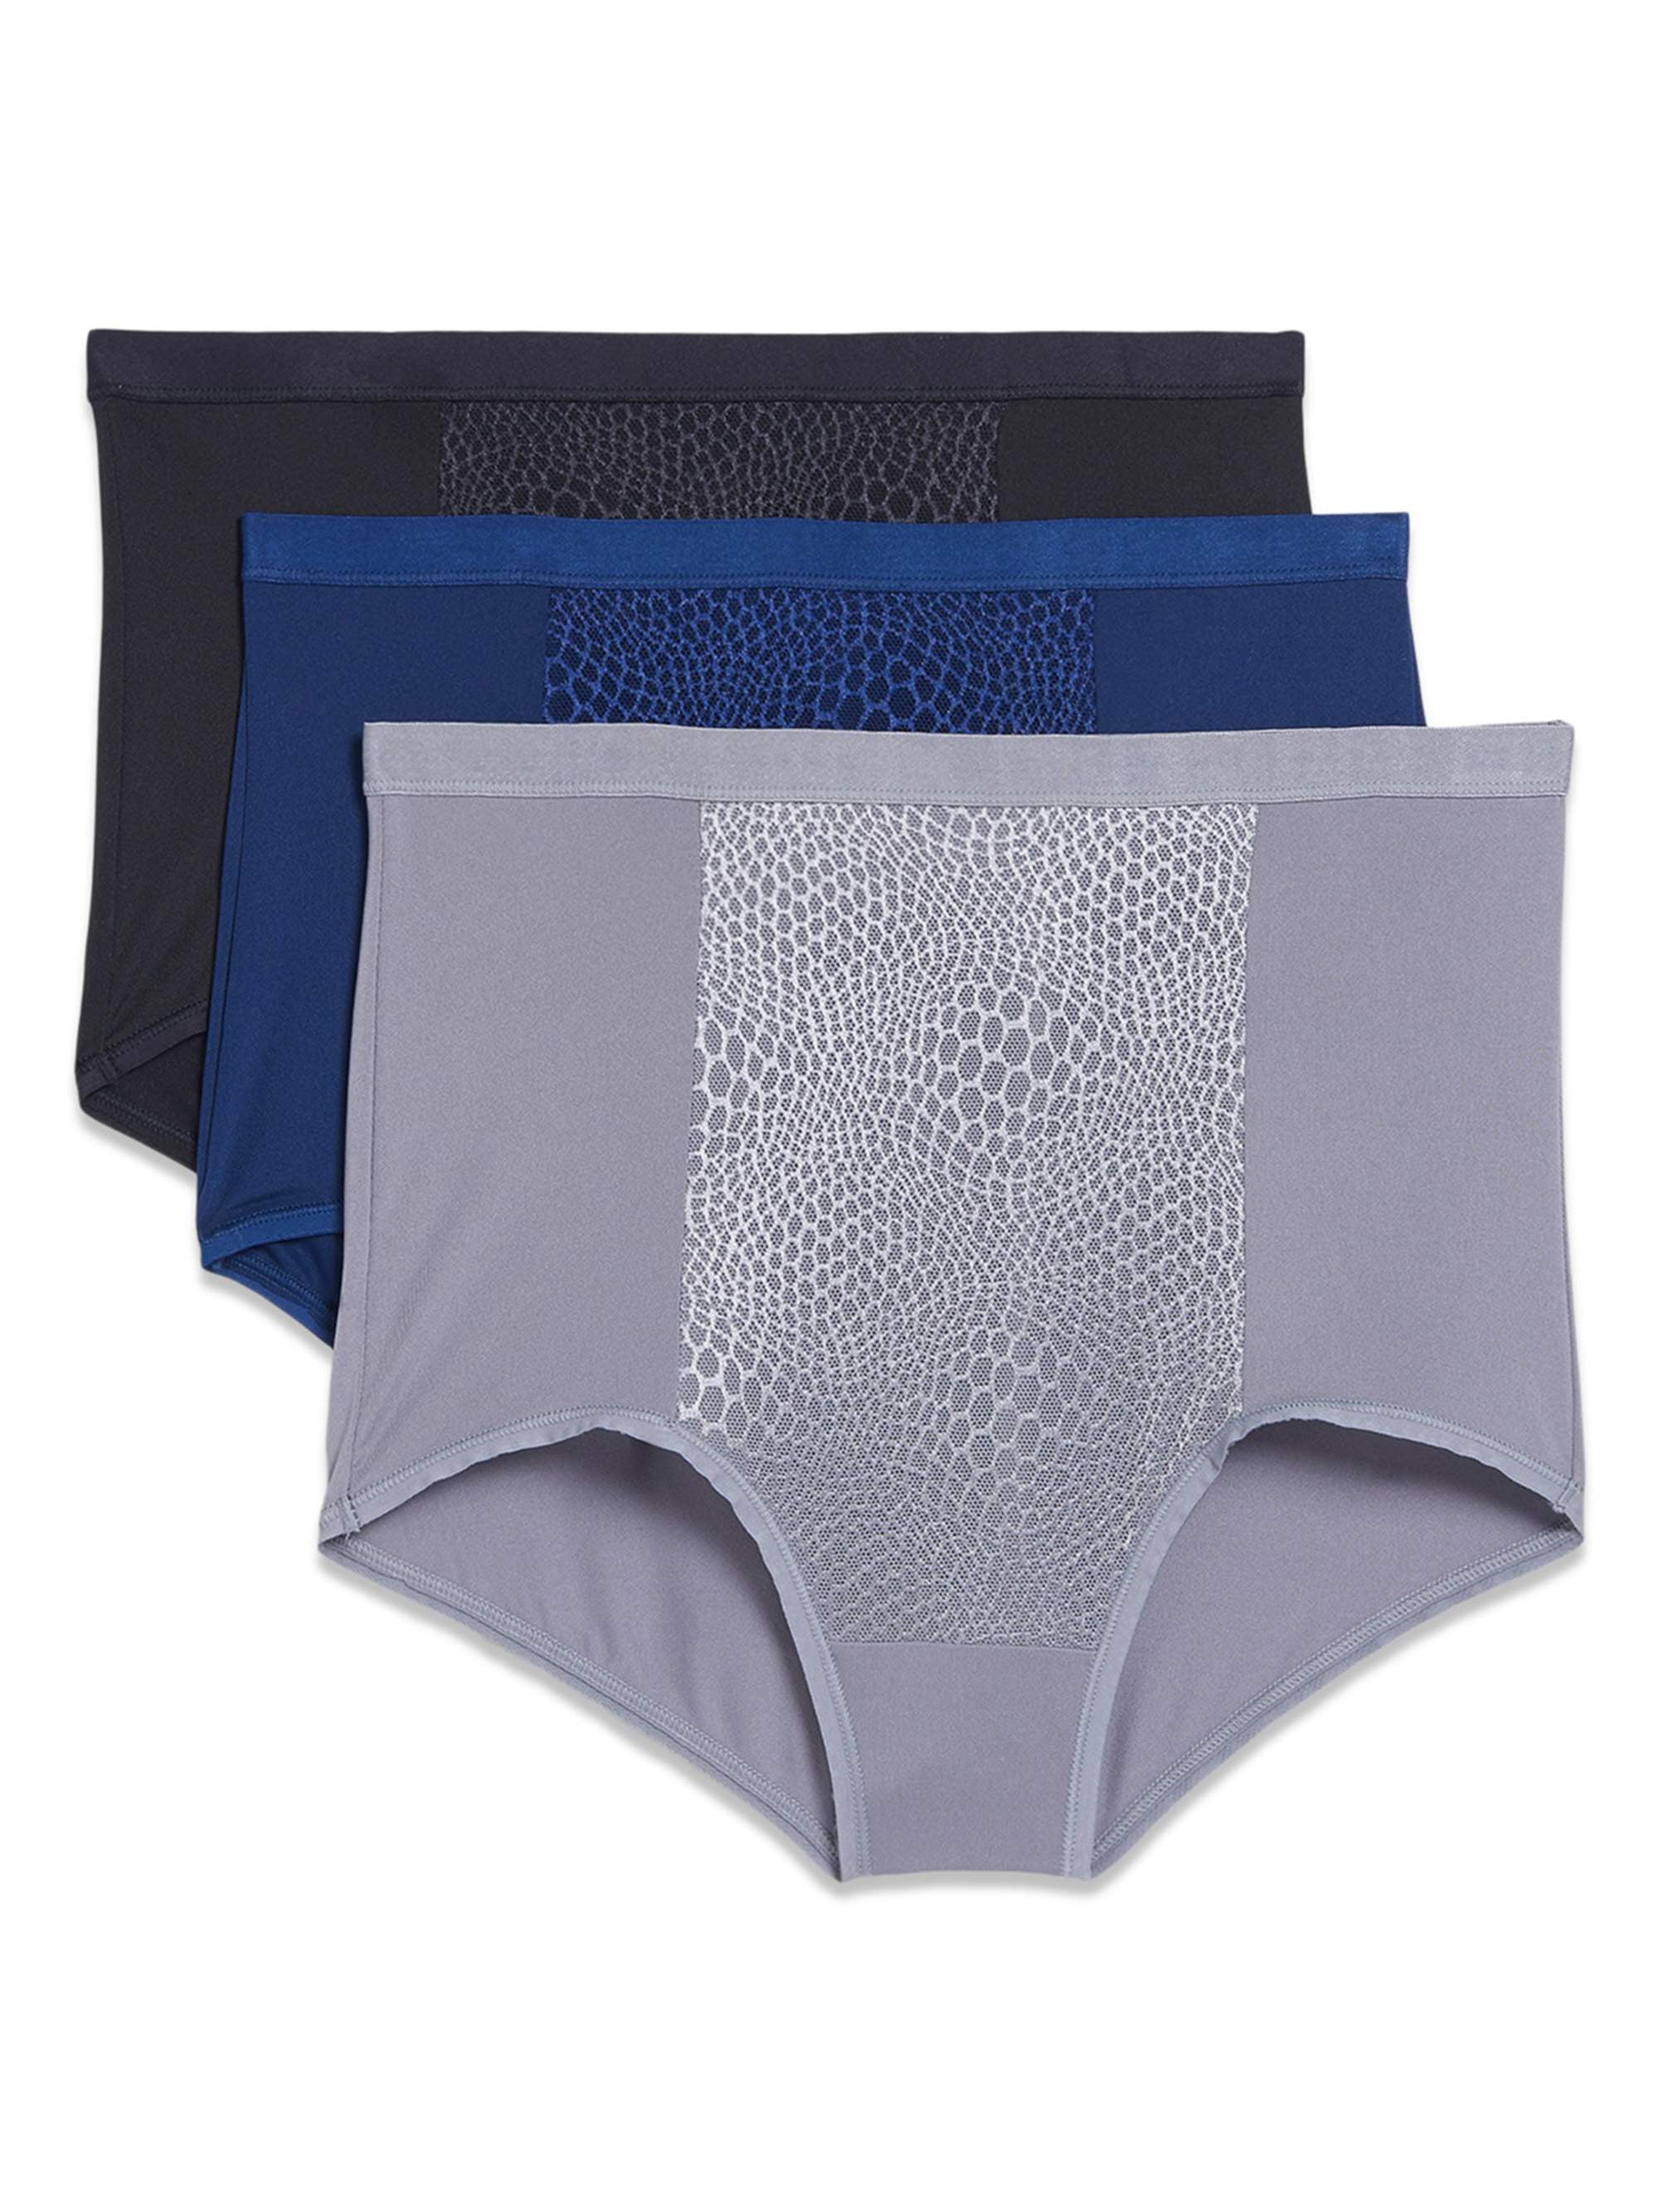 Blissful Benefits by Warner's Women's Tummy Smoothing Brief, 3-Pack